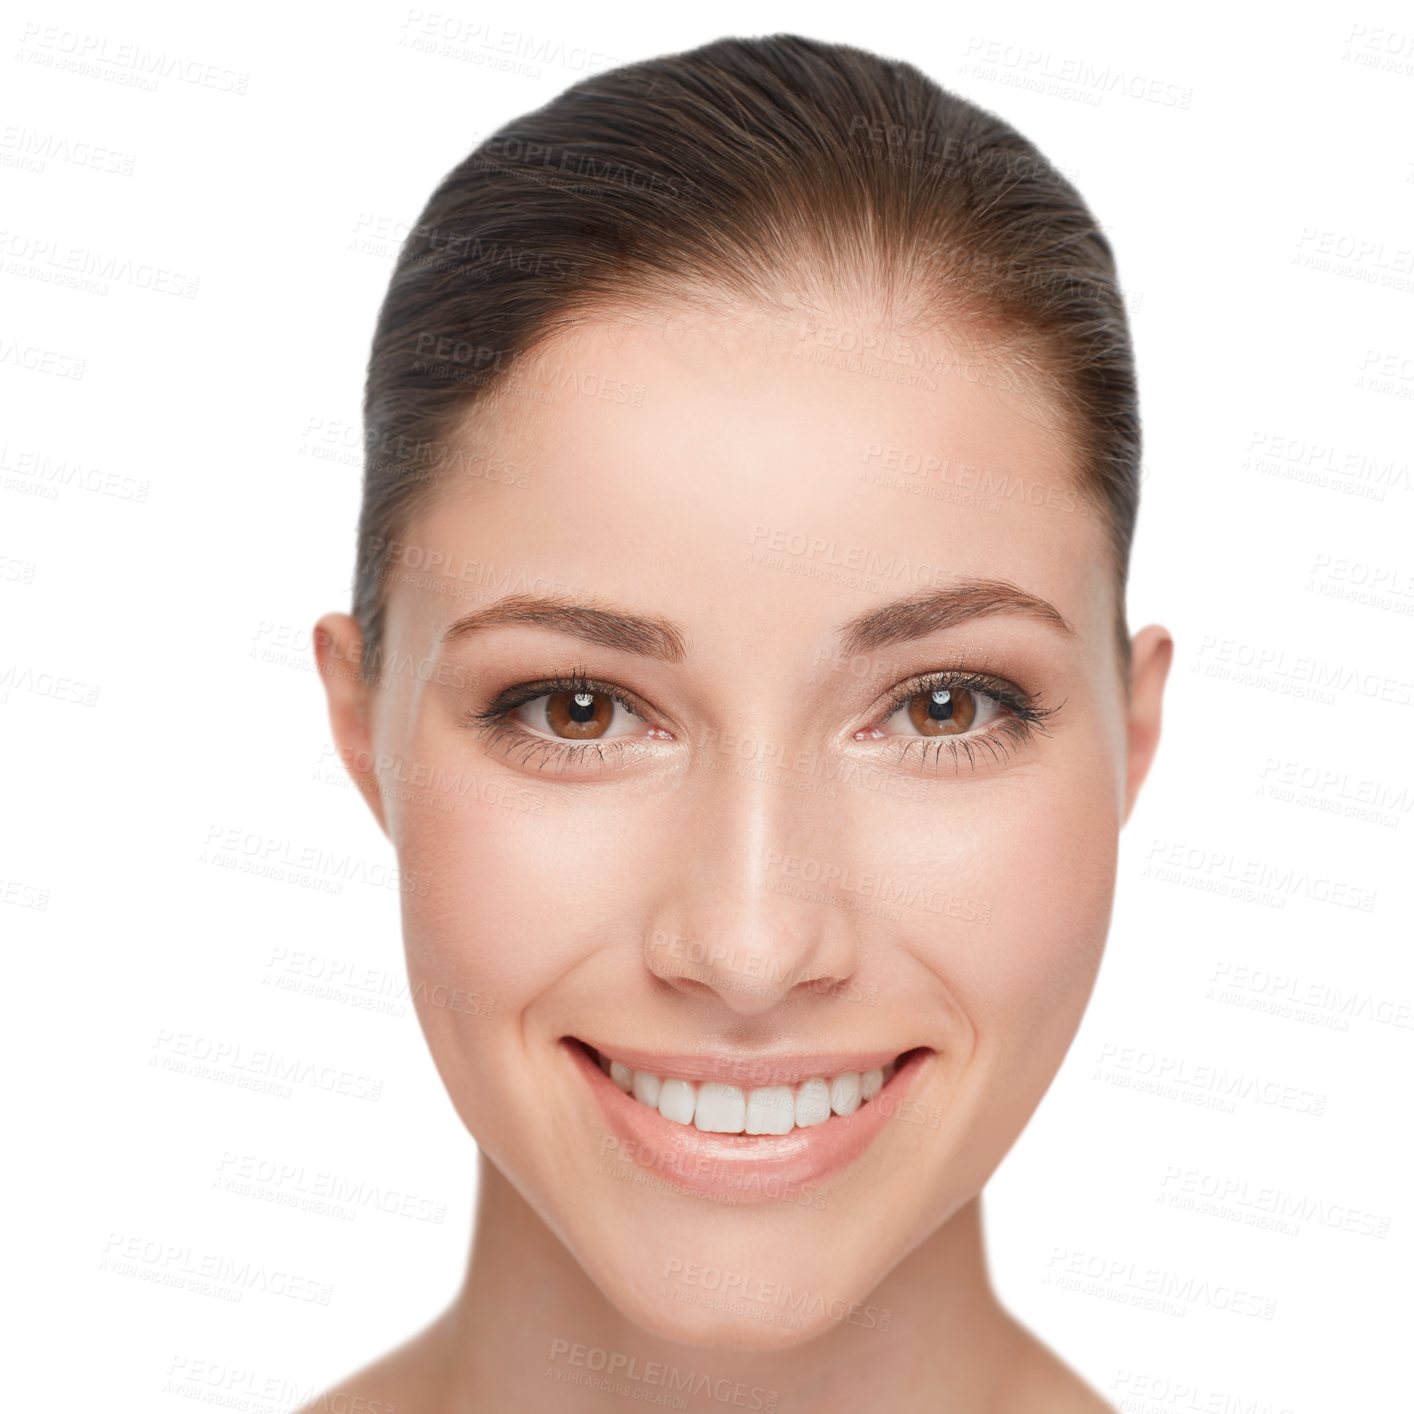 Buy stock photo Woman, face and skincare smile for wellness health, results or clean isolated on transparent png background. Female person, portrait and cosmetic dermatology luxury or confident glow, shine for happy